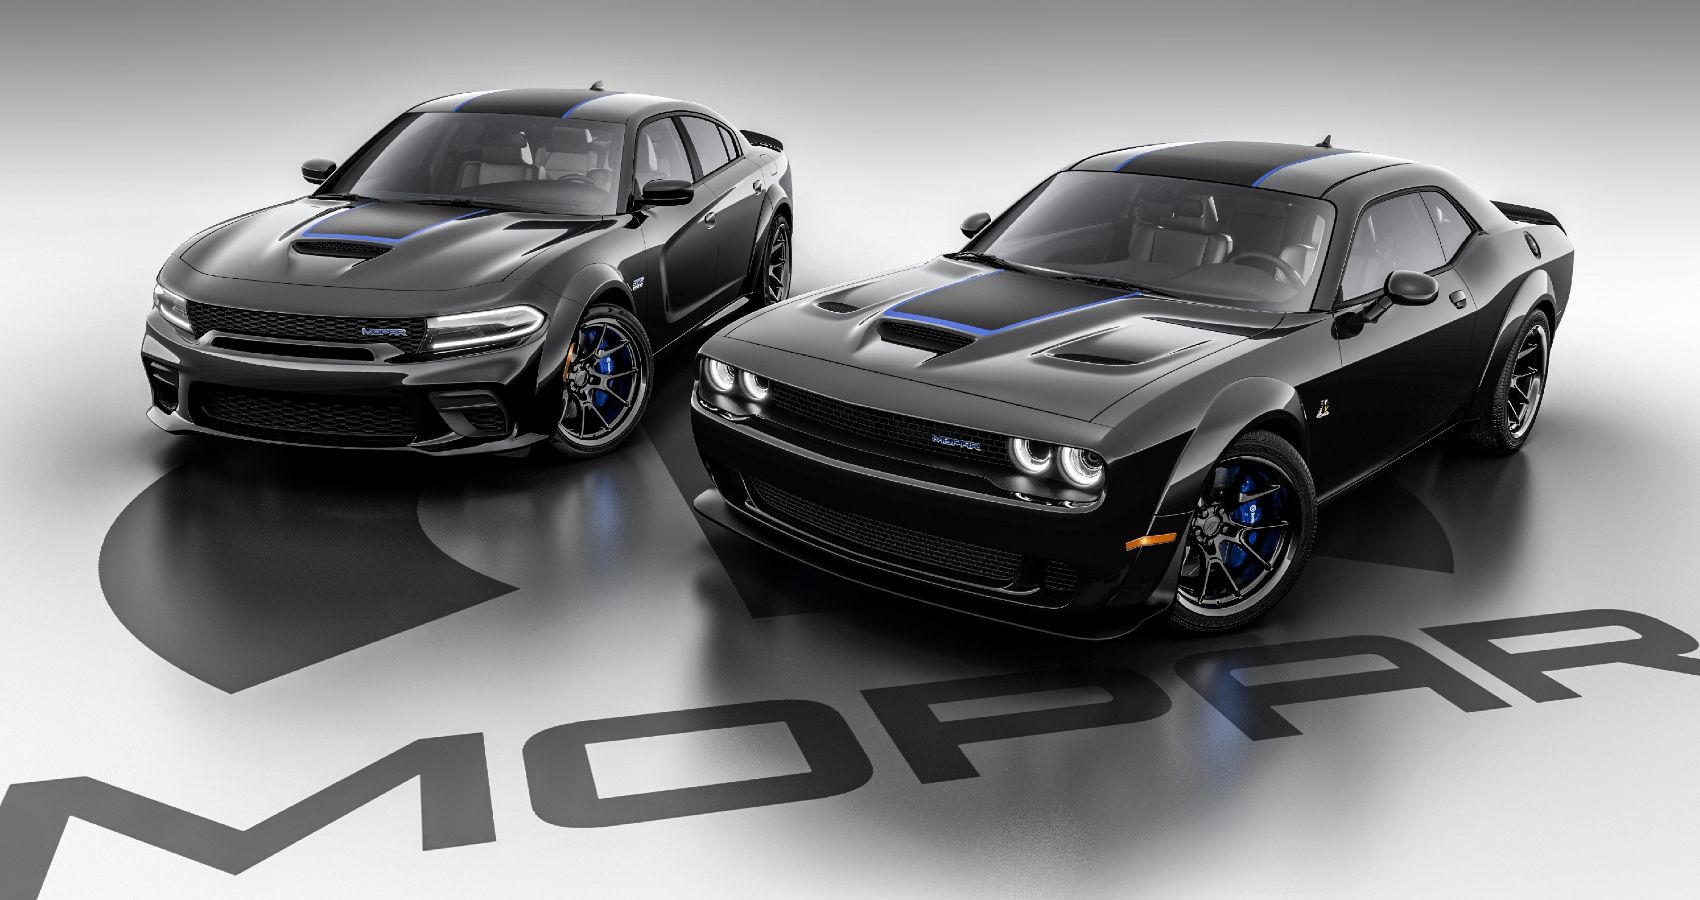 Dodge Challenger And Charger Mopar ’23 Special Edition, cars side by side